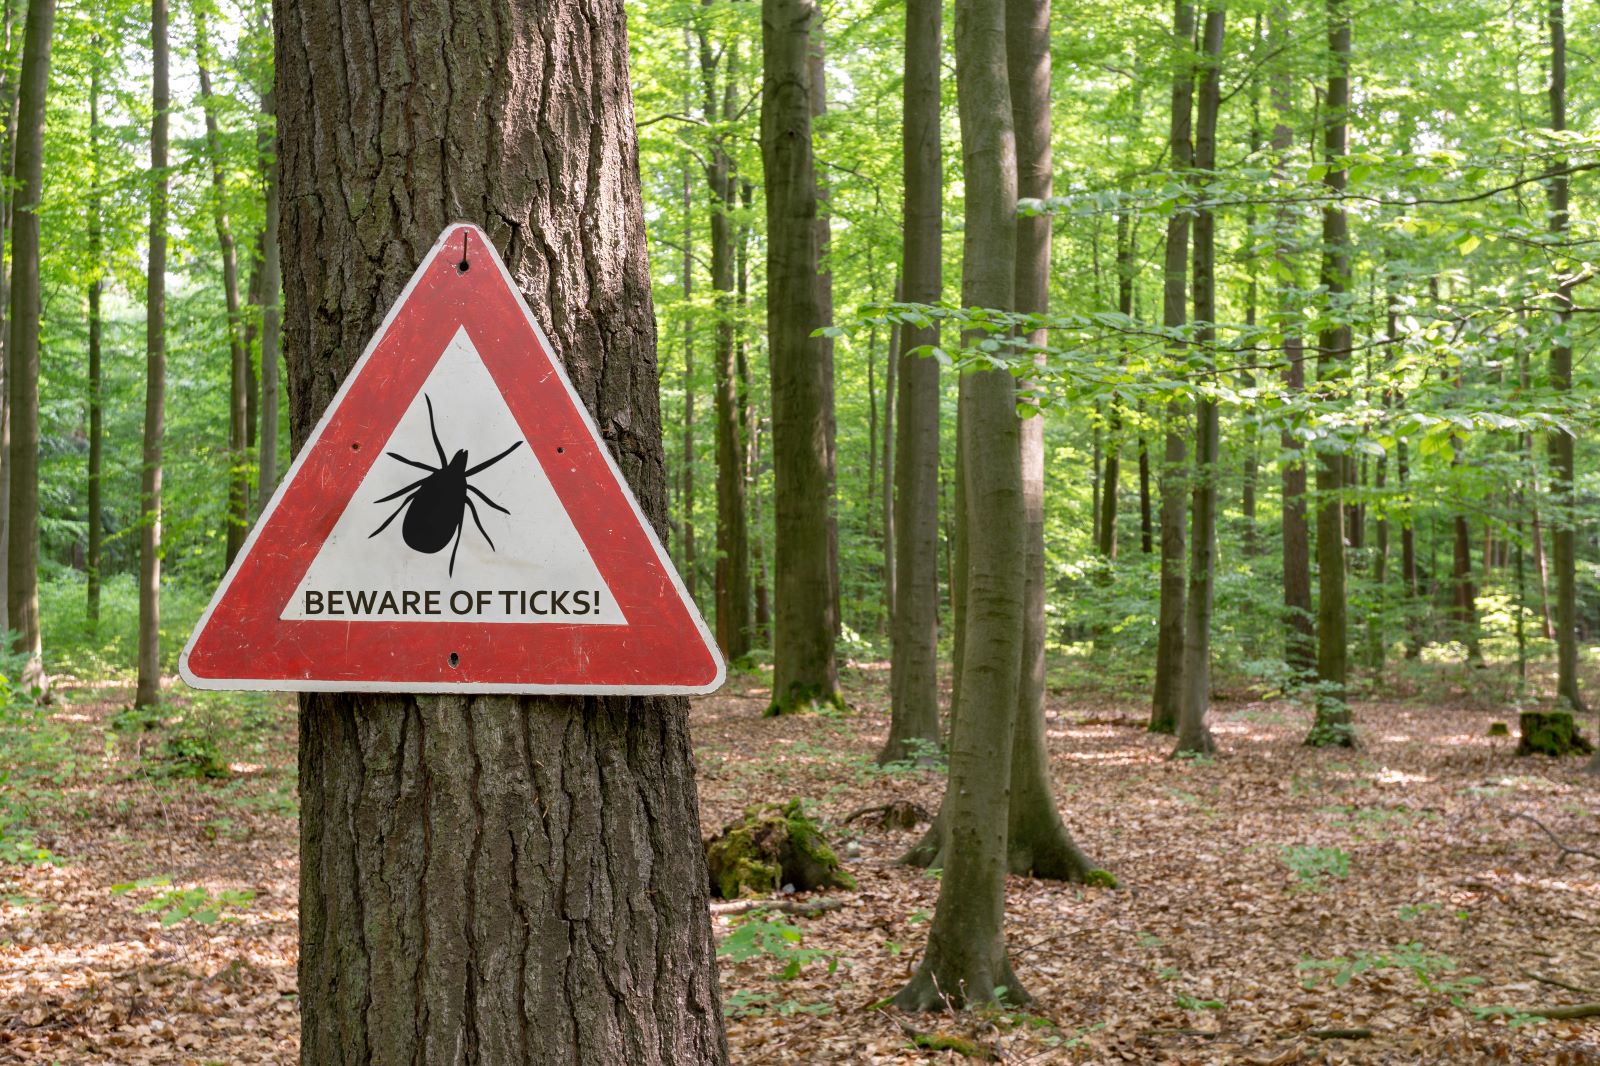 Lyme Disease Is More Prevalent Than Ever, As Cases Erupt Around the Globe